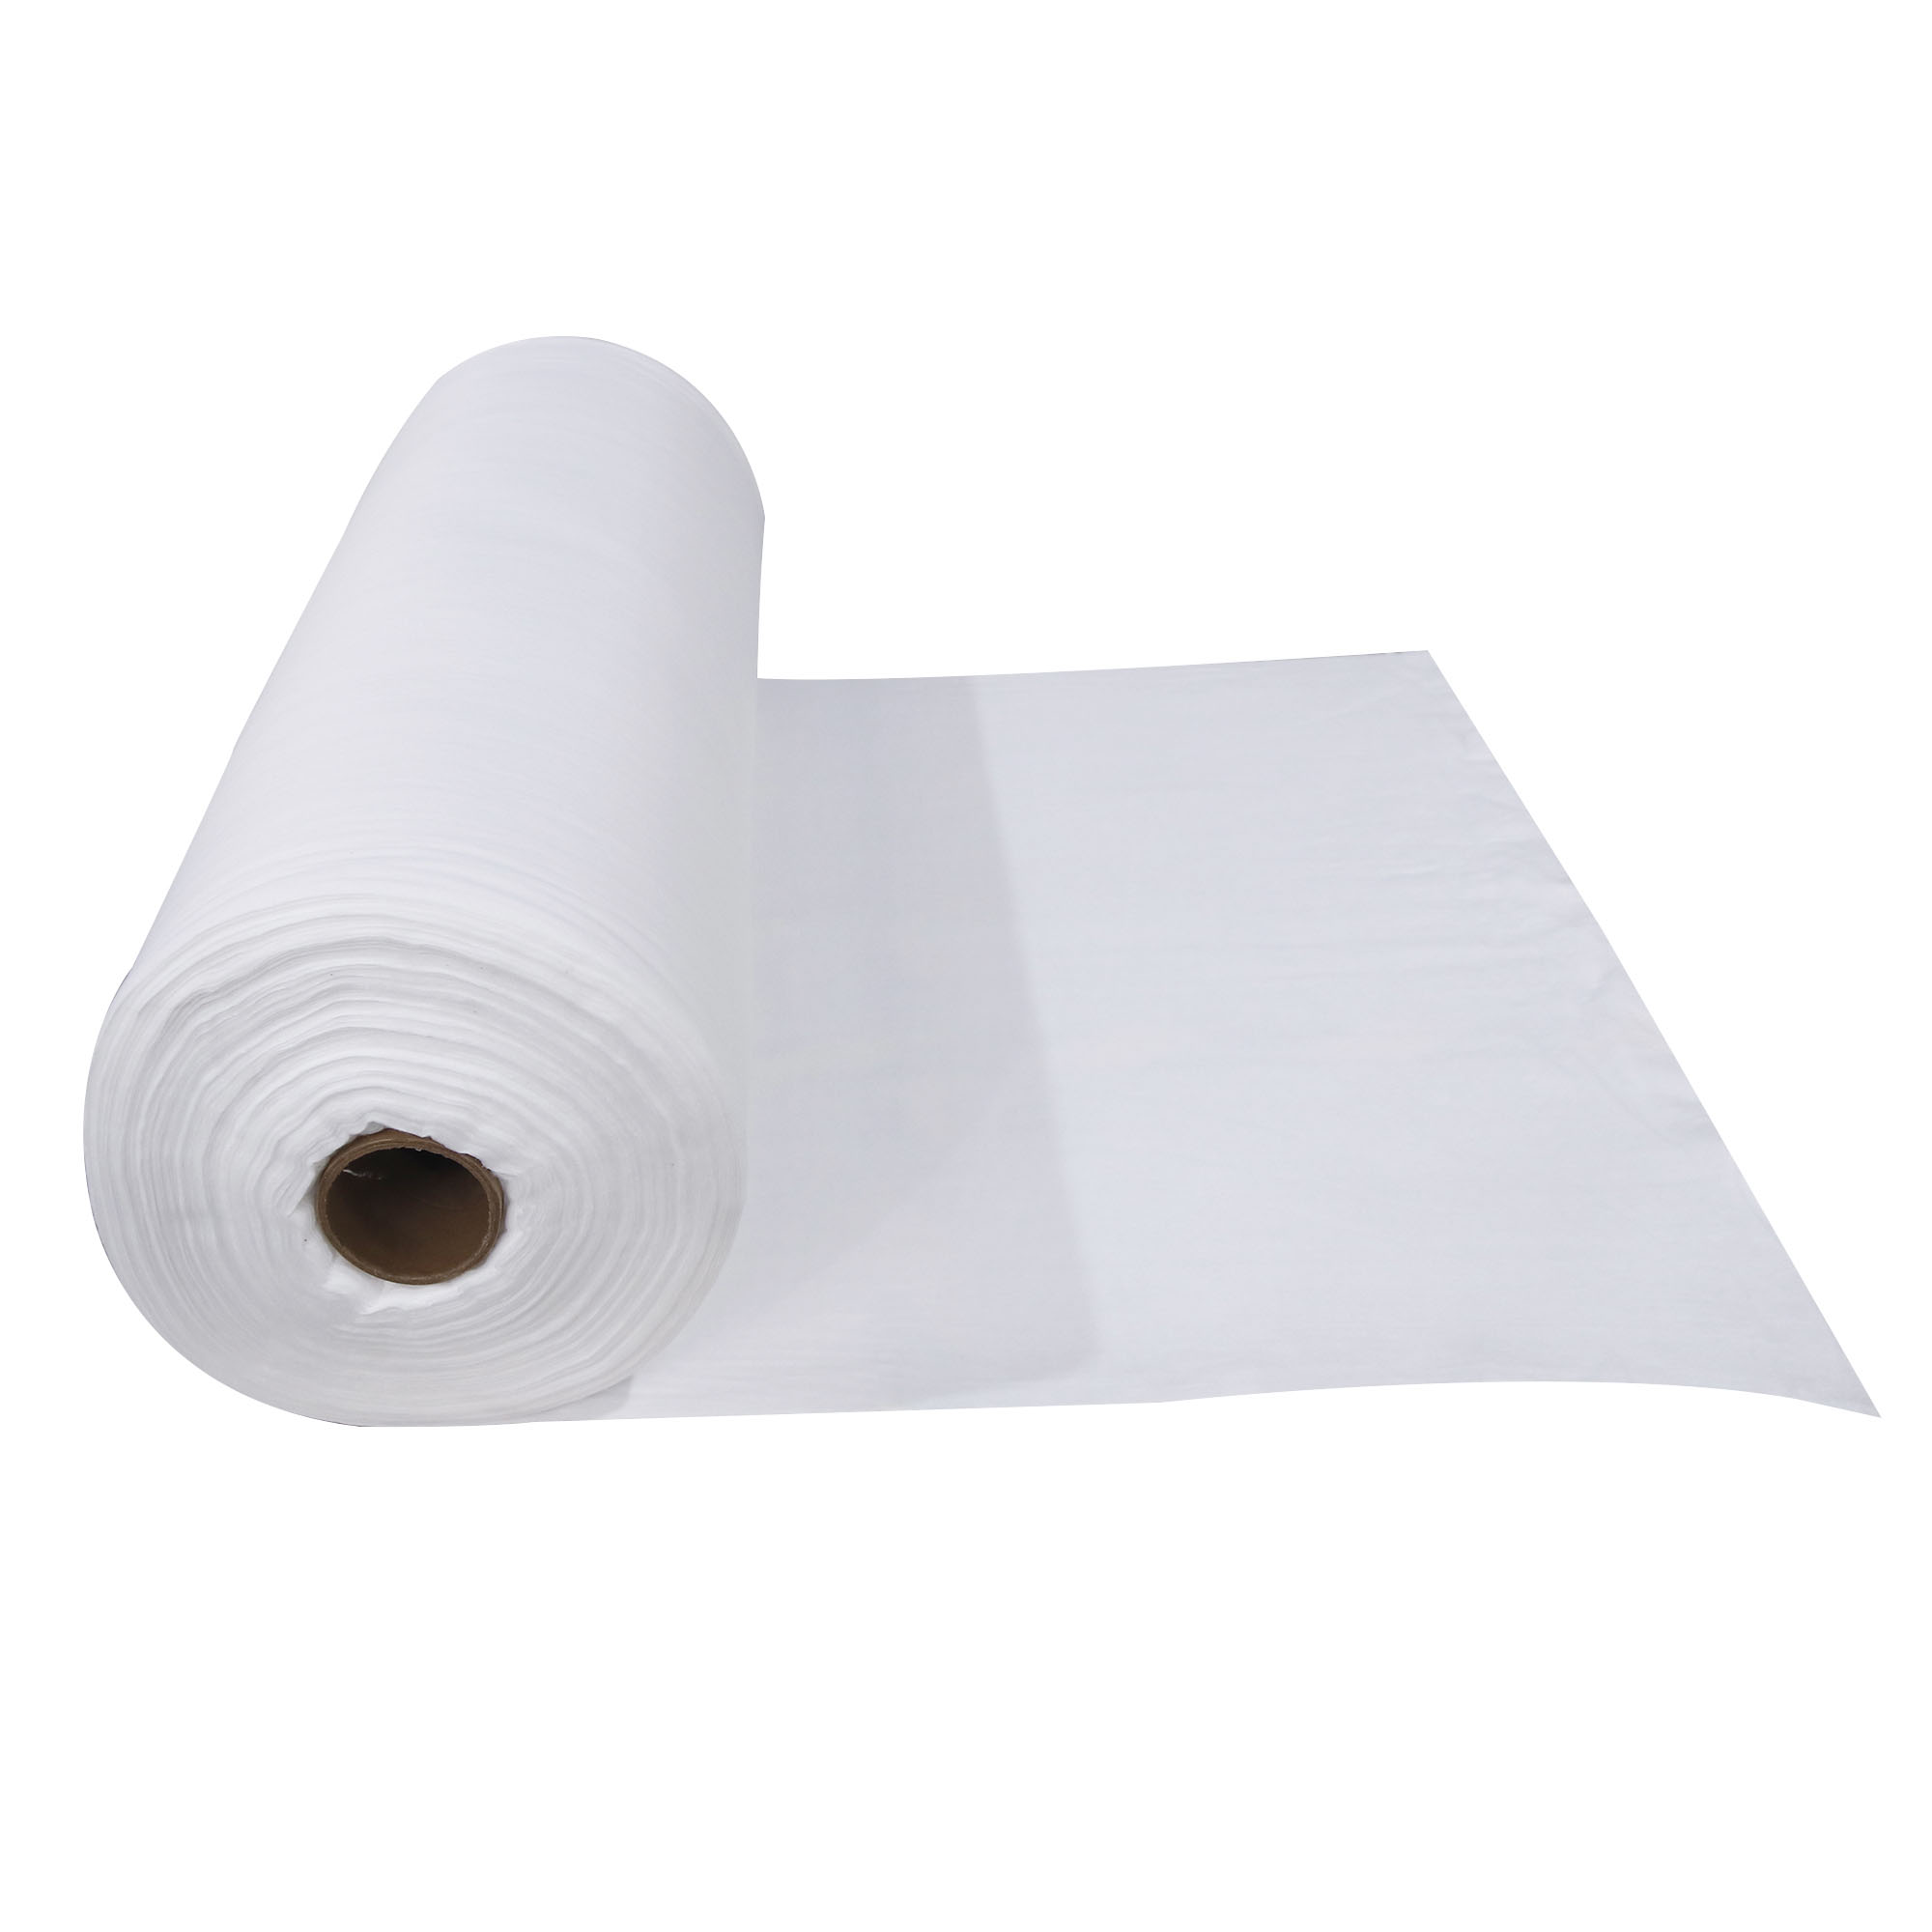 Non-woven Fabric Cotton Viscose Polyester 3ply Roll Raw Material for Cosmetic Pad